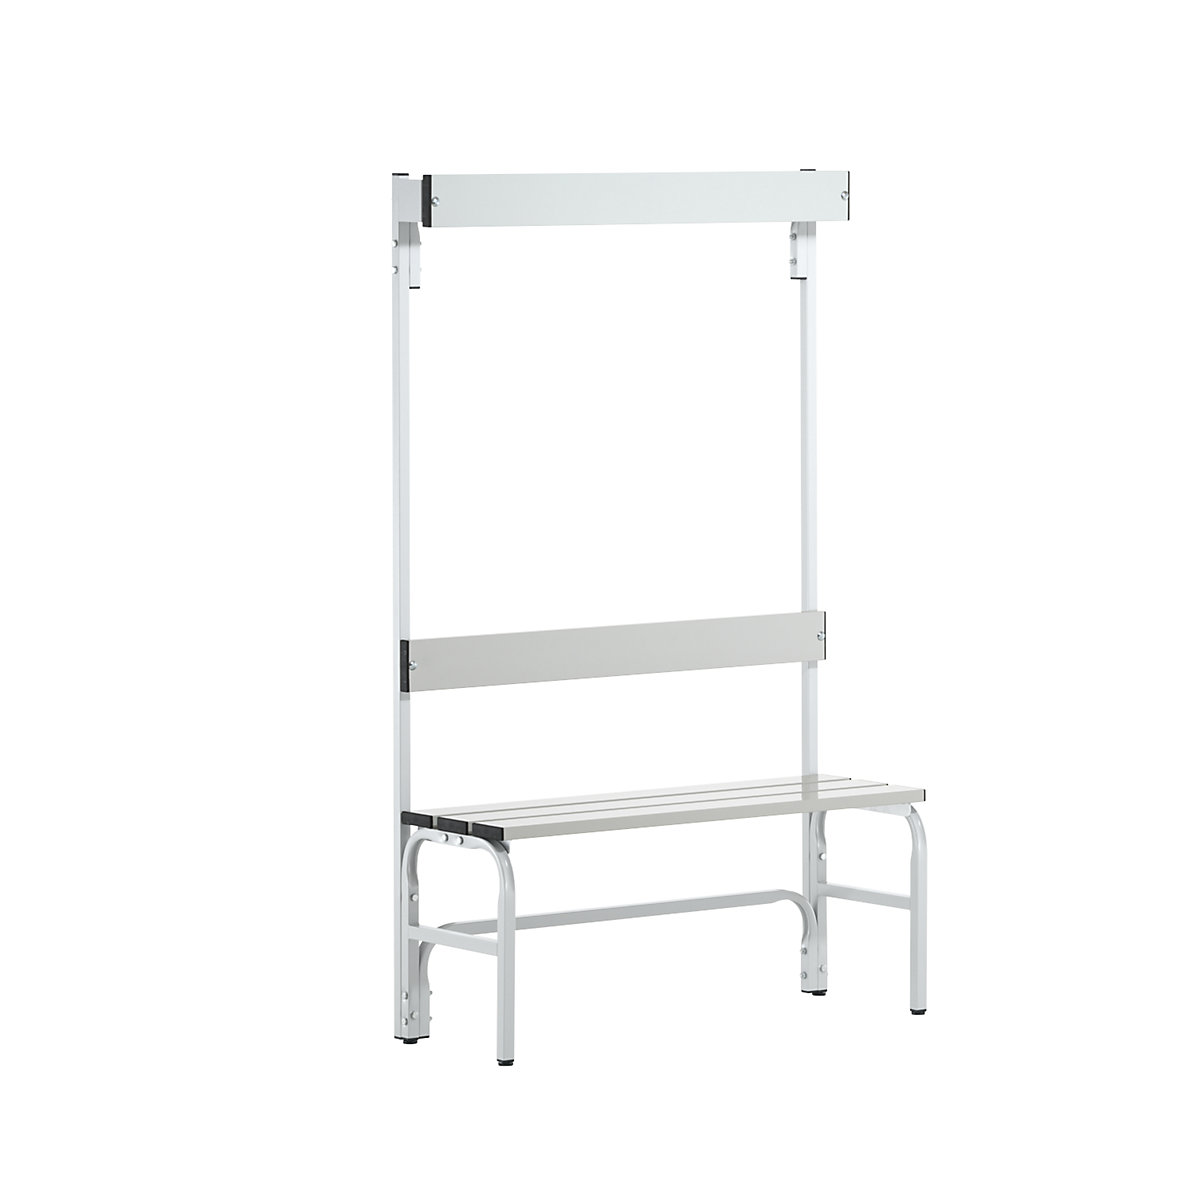 Sypro – Changing room bench made of stainless steel, HxD 1650 x 375 mm, length 1015 mm, 3 hooks, light grey